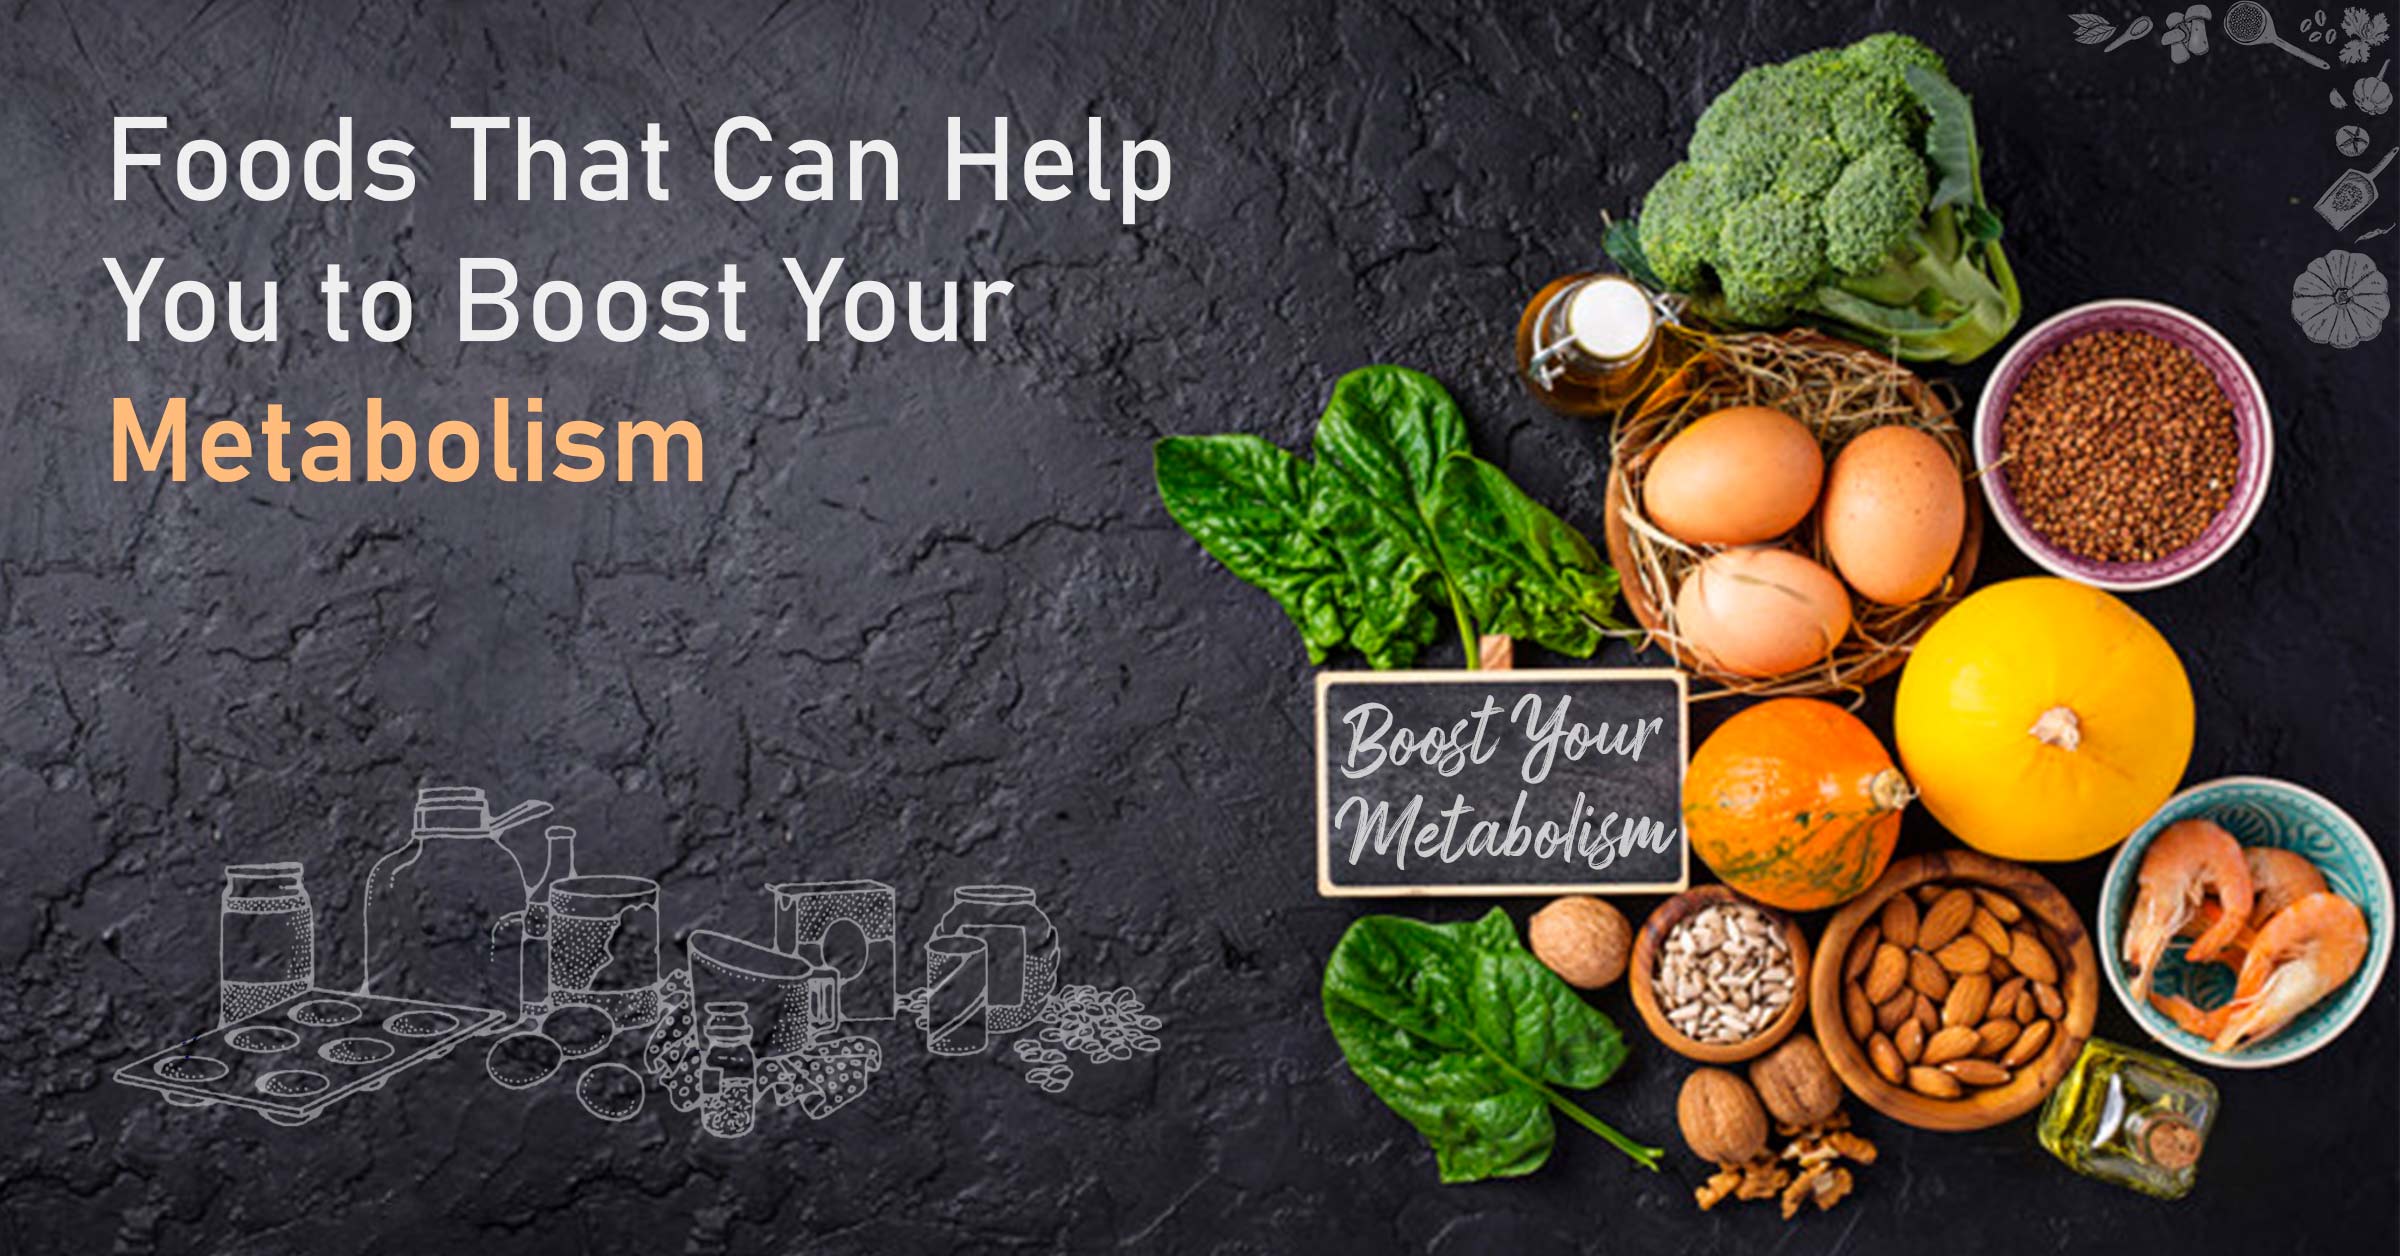 Foods That Can Help You to Boost Your Metabolism